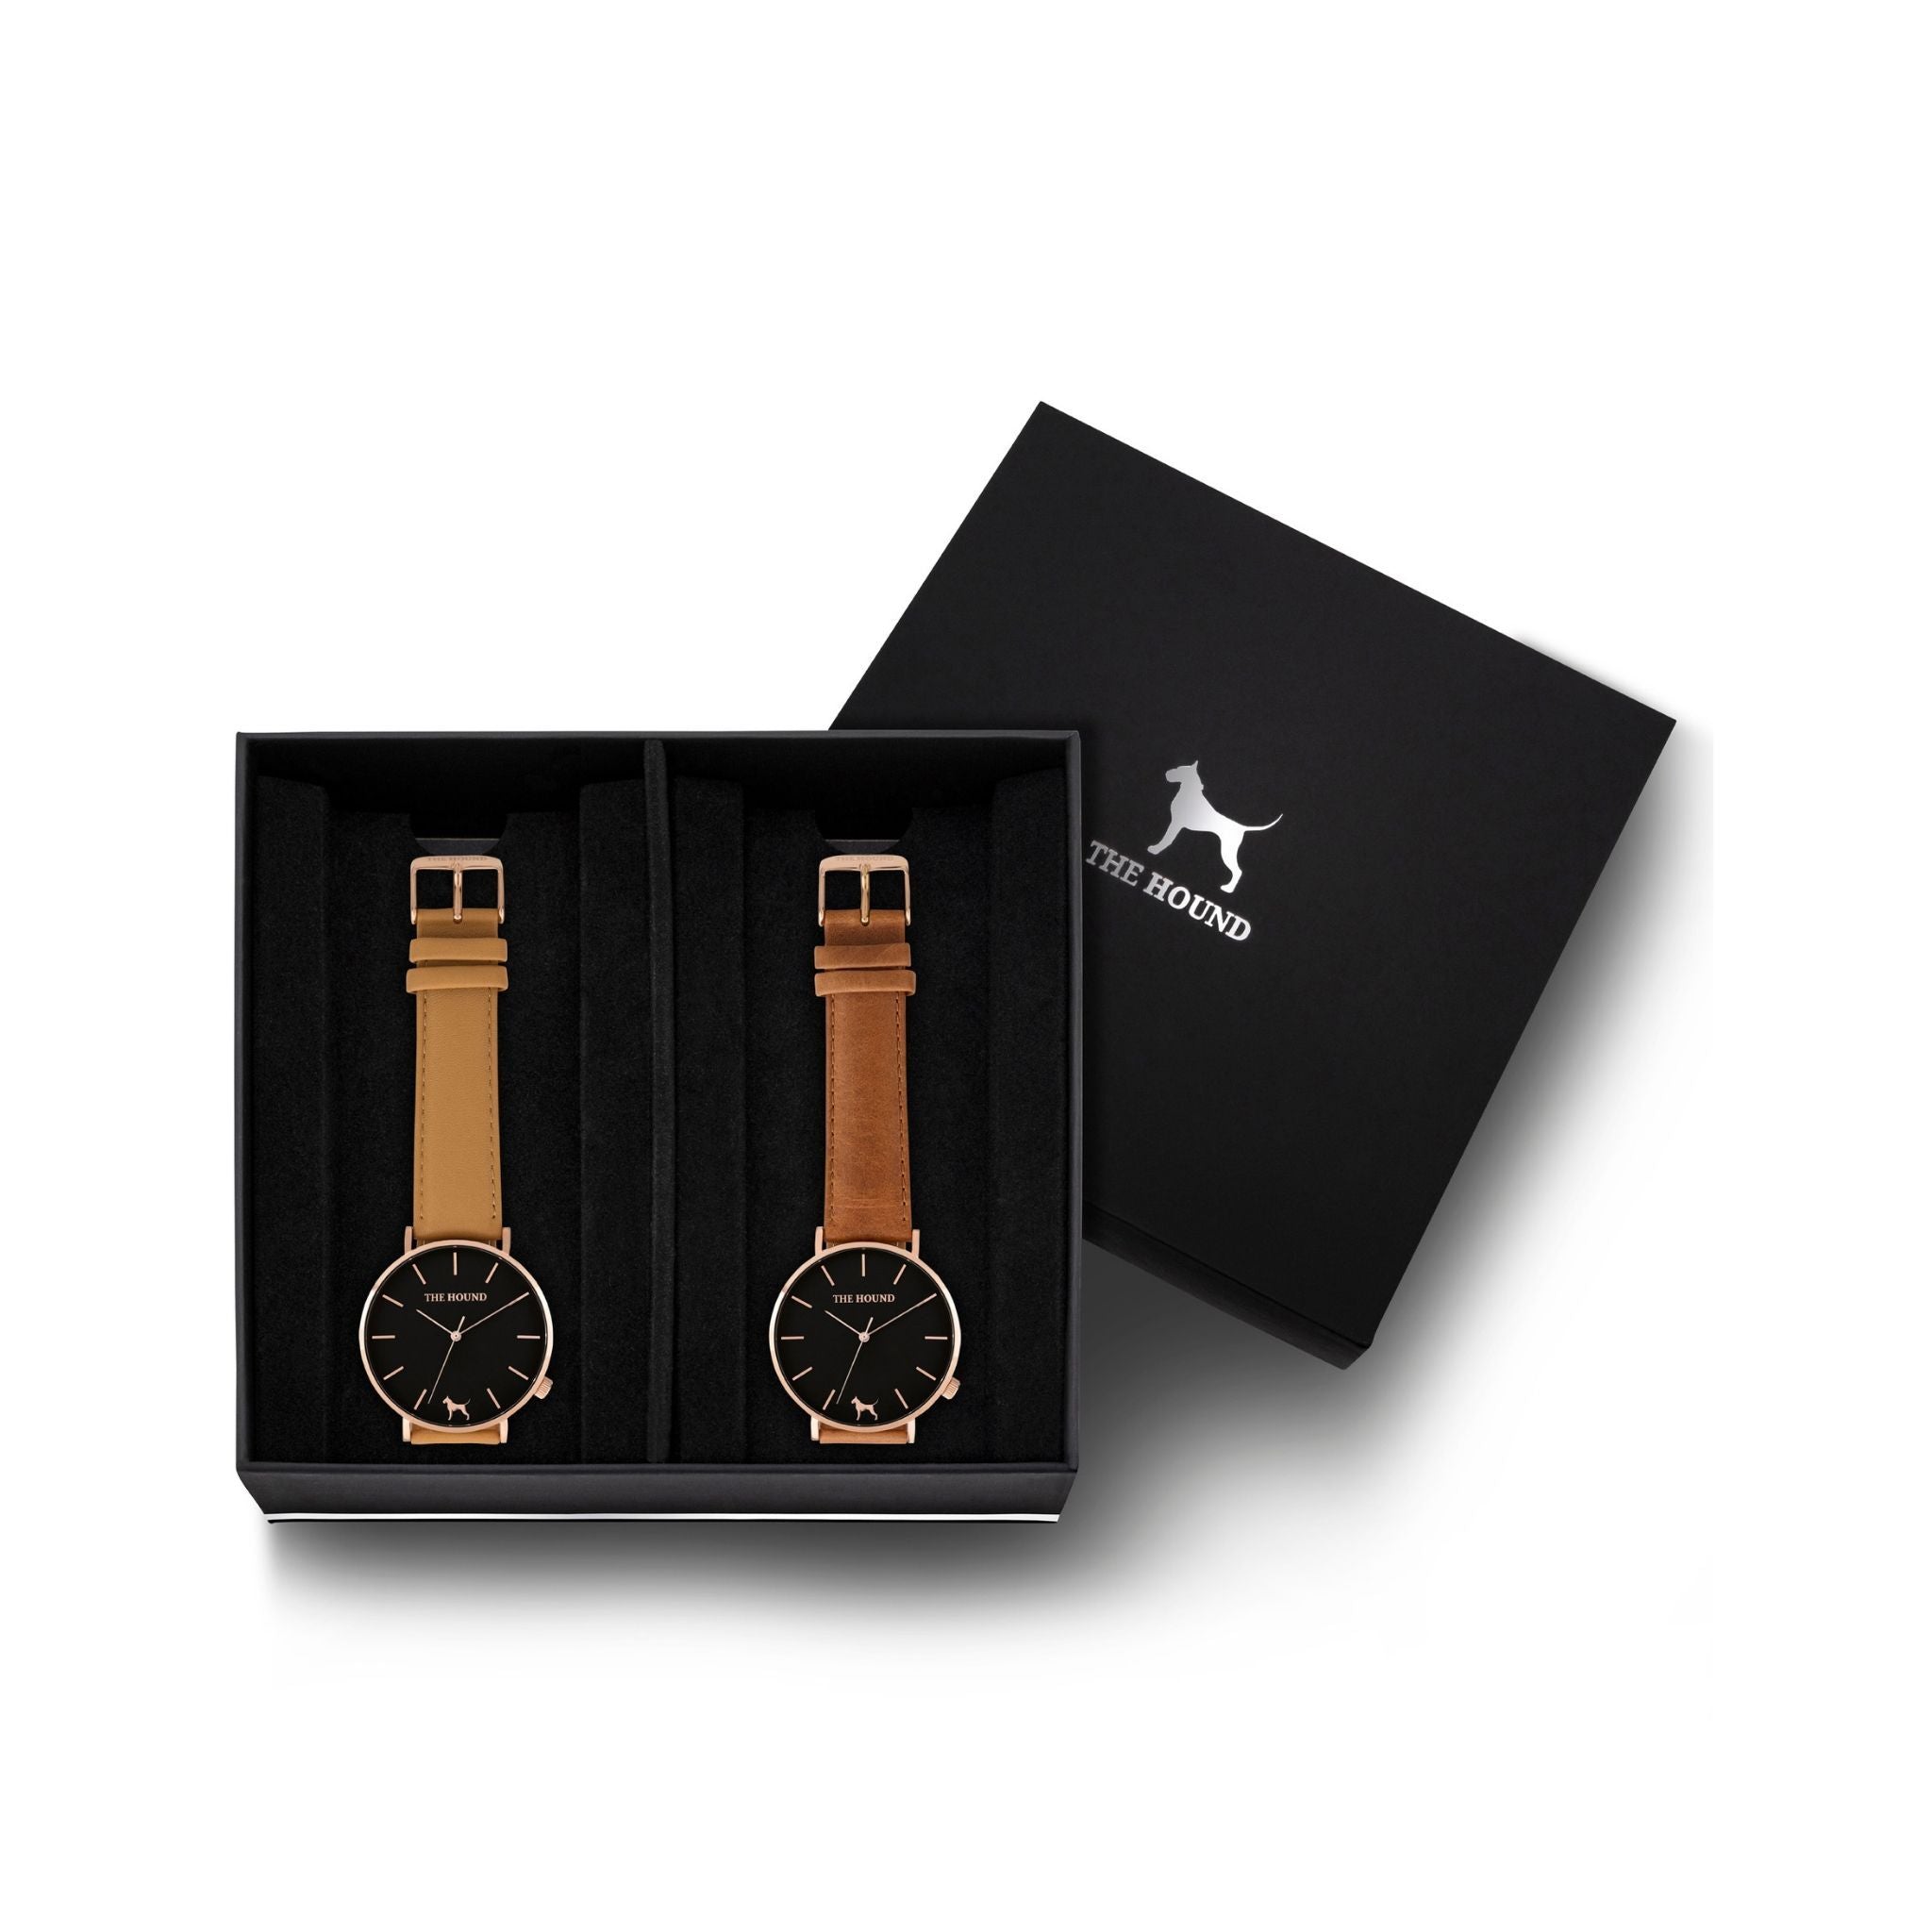 Custom gift set - Rose gold and black watch with stitched camel genuine leather band and a rose gold and black watch with stitched tan genuine leather band